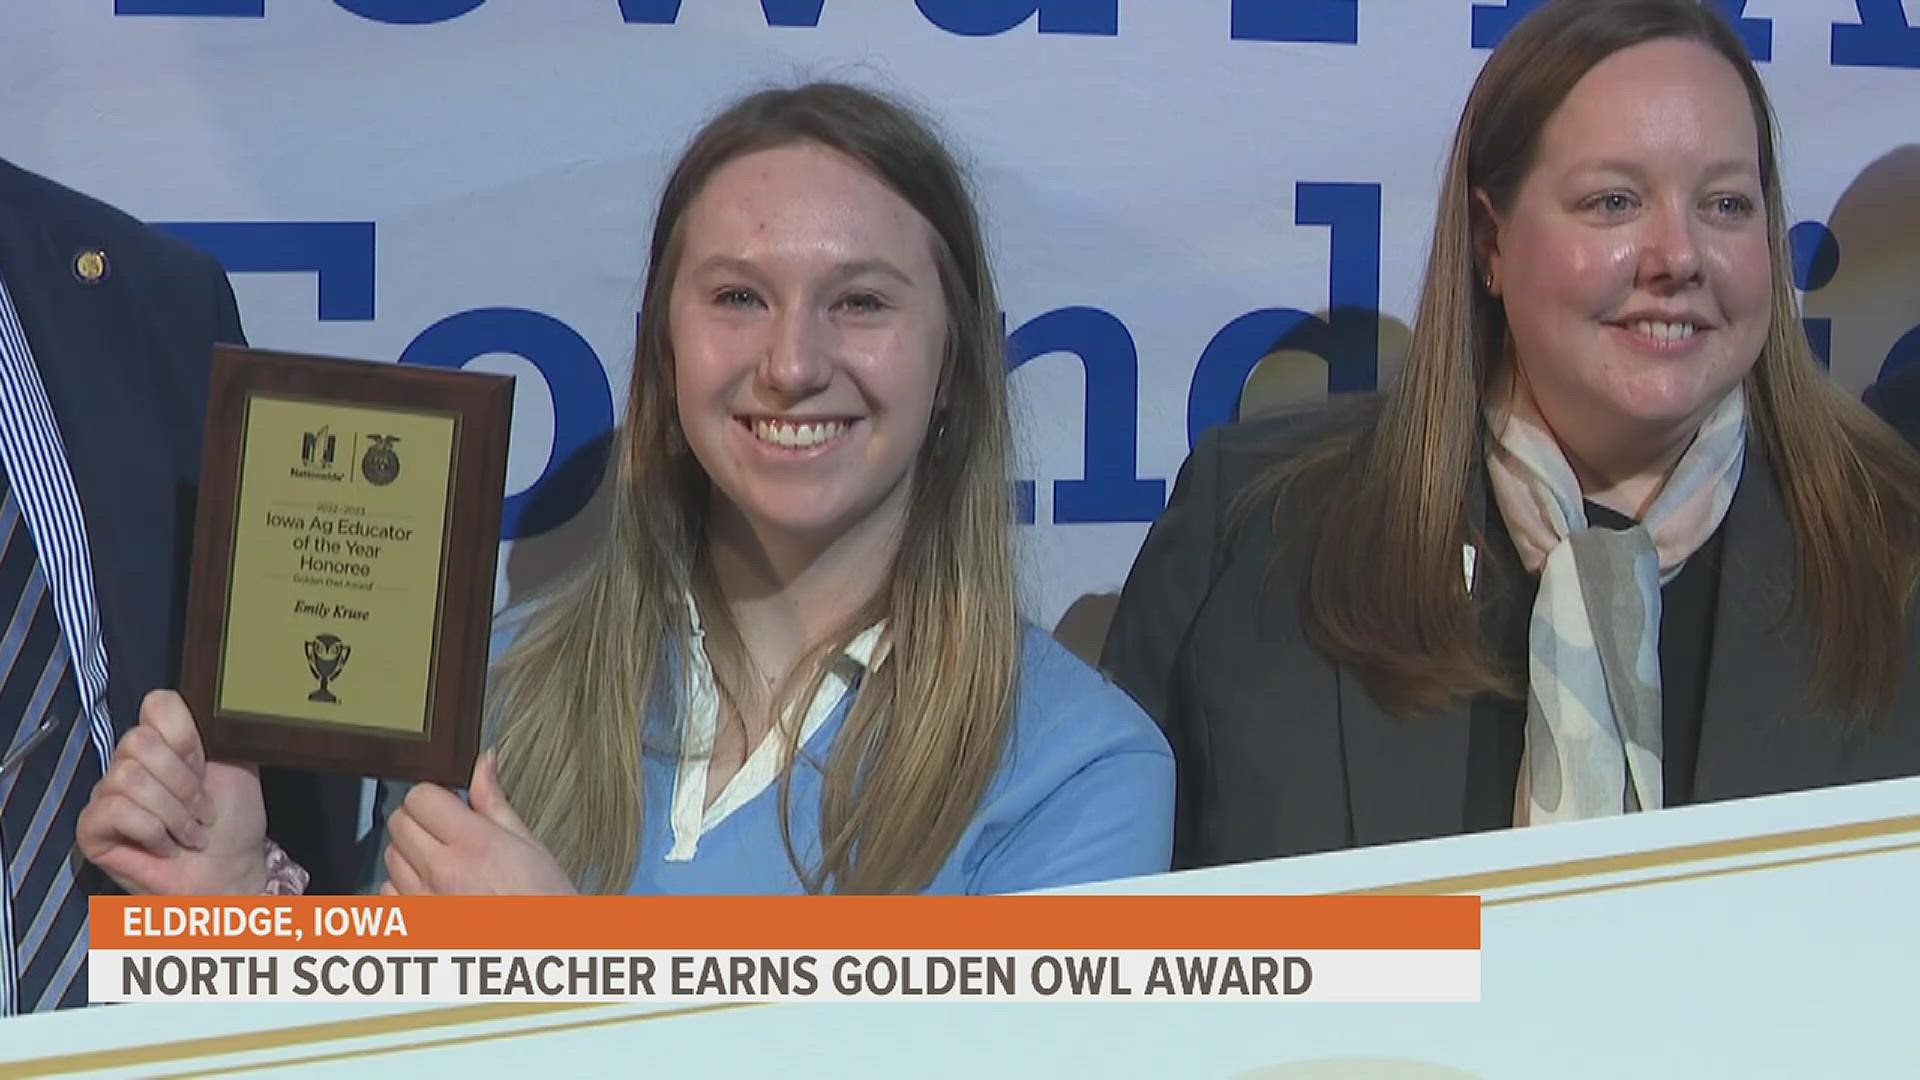 Emily Kruse began teaching at the QC area school just last year. She was one of 166 agriculture teachers nominated.